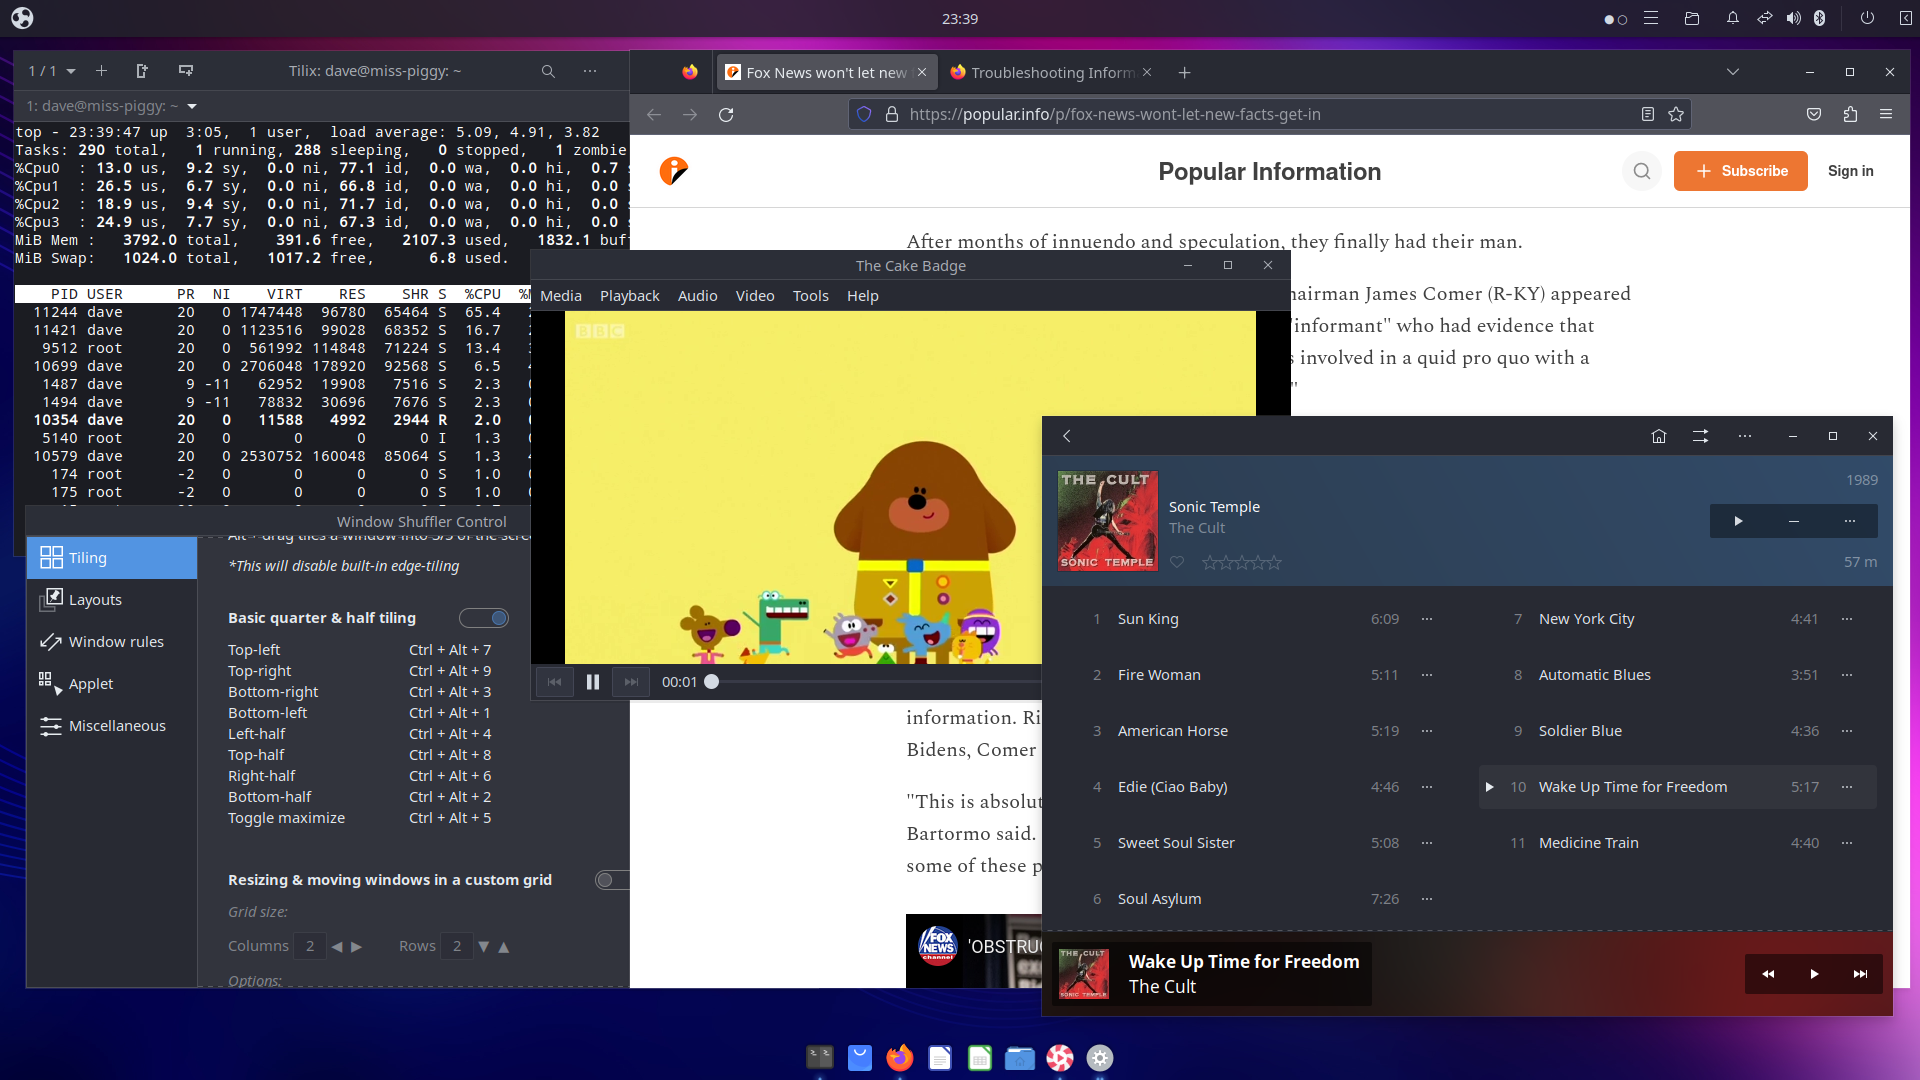 A screenshot of the Ubuntu Budgie desktop. Under the dark top bar containing the start-menu button, clock, and system tray, a variety of applications are shown including "top" running under the Tilix terminal, The Cult's "Sonic Template" album in the Lollypop music player, an episode of "Hey Duggee" playing in the Parole video player, and Firefox in the background showing a news article. At the bottom center of the screen is the MacOS X Dock-like application showing the icons of all the running applications, and a few others for quick launch.